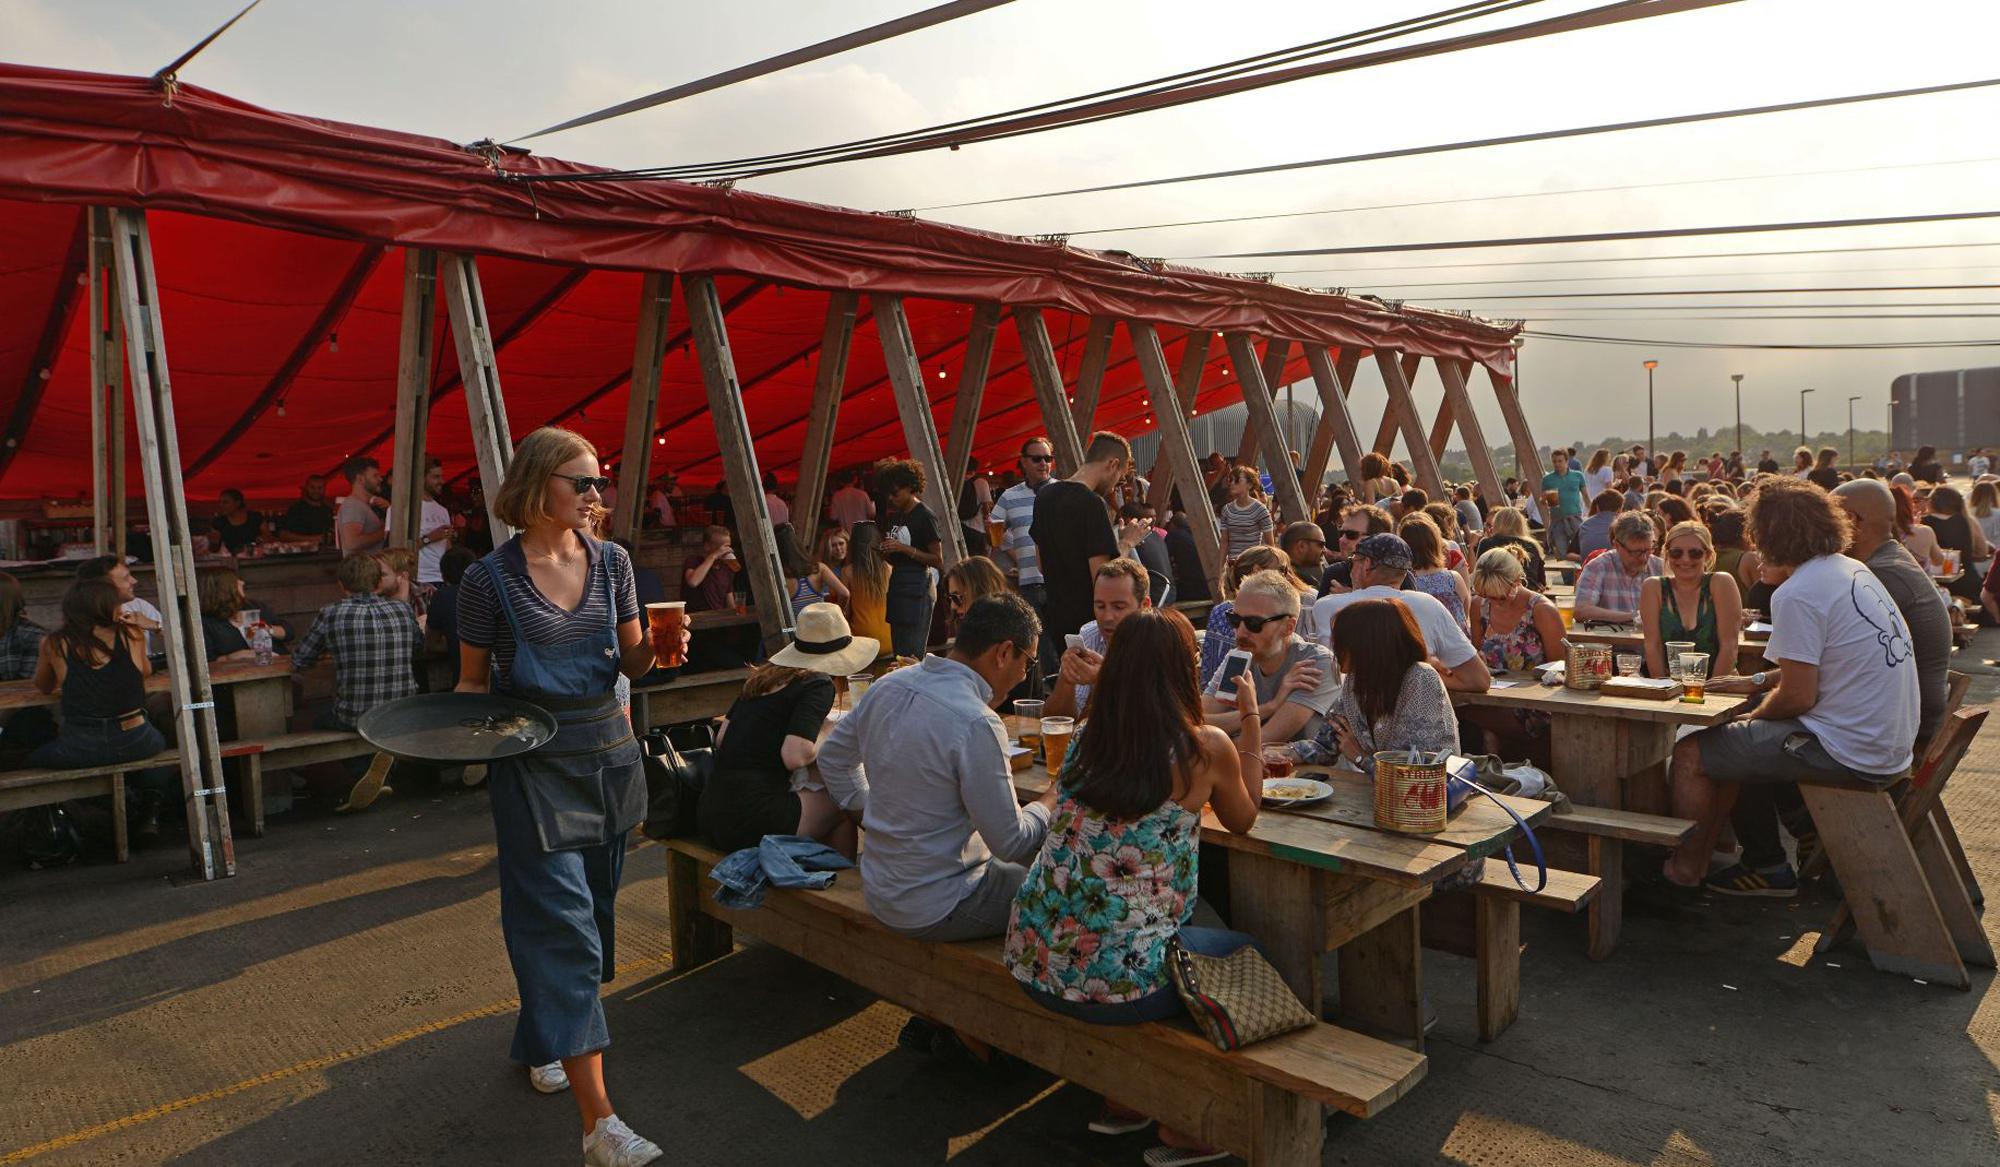 Frank’s is a bar on top of the multistorey car park in Peckham